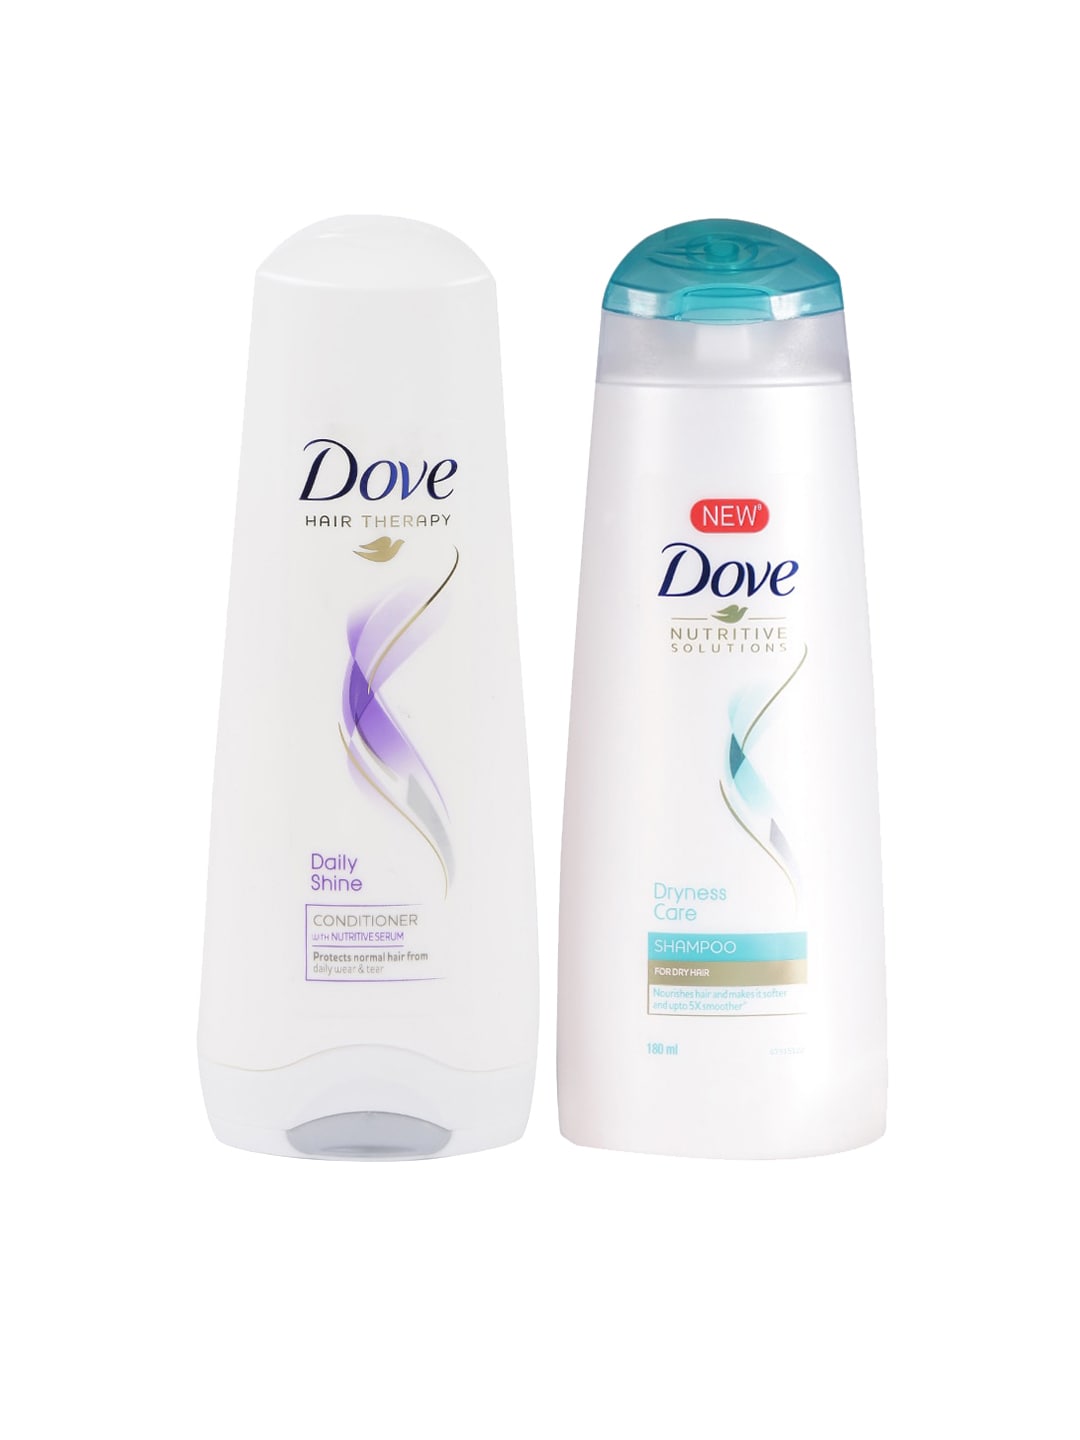 Dove Hair Therapy Daily Shine Conditioner & Nutritive Solutions Dryness Care Shampoo Price in India